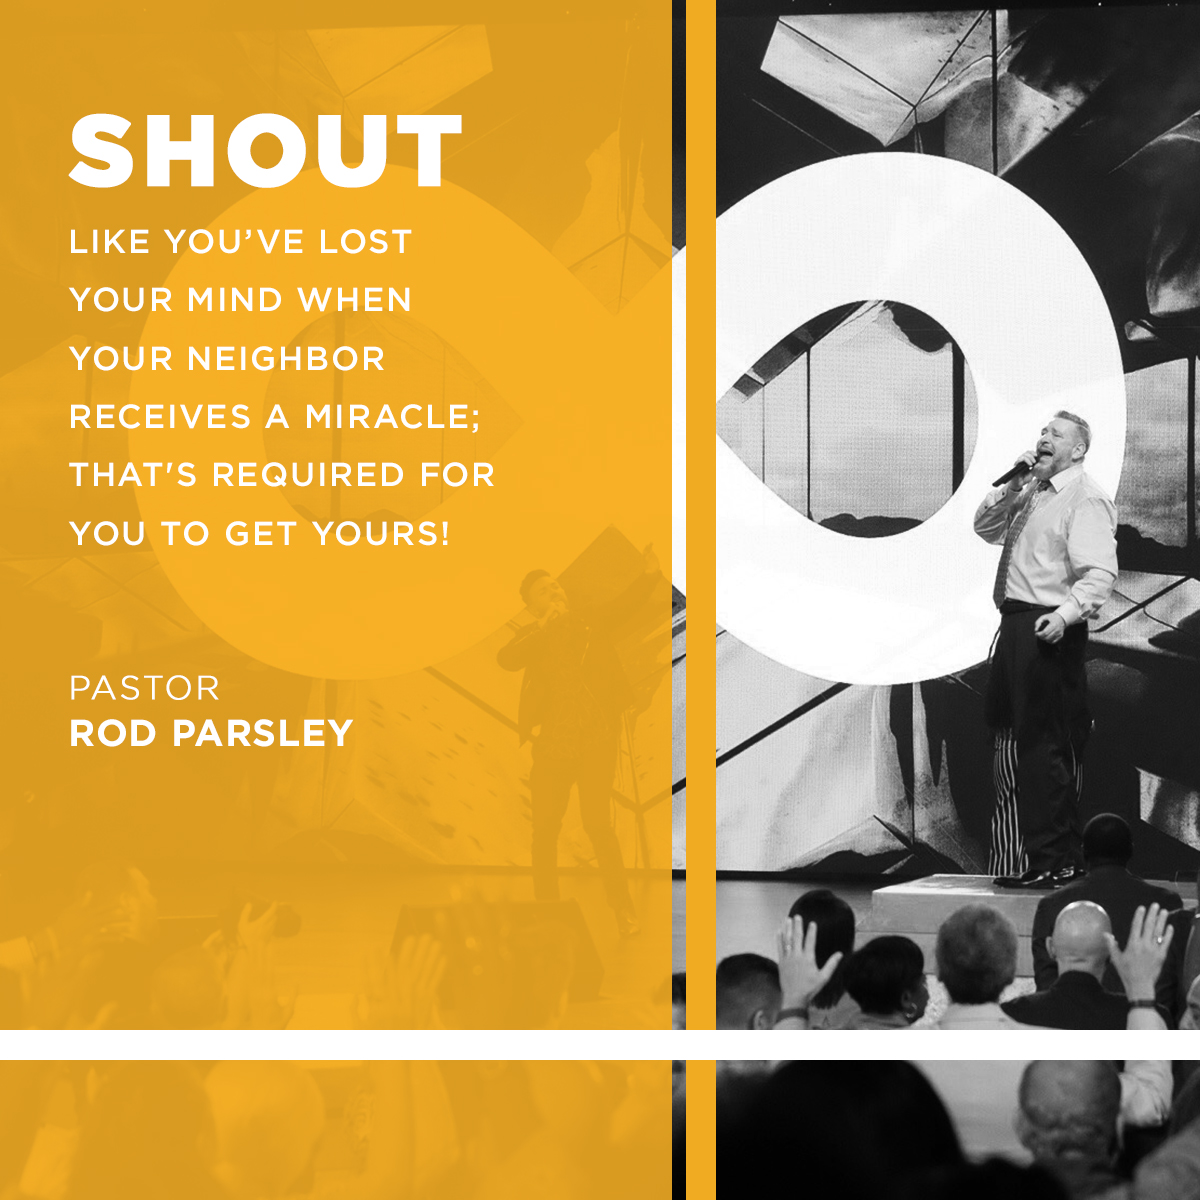 “Shout like you’ve lost your mind when your neighbor receives a miracle; that's required for you to get yours!” – Pastor Rod Parsley